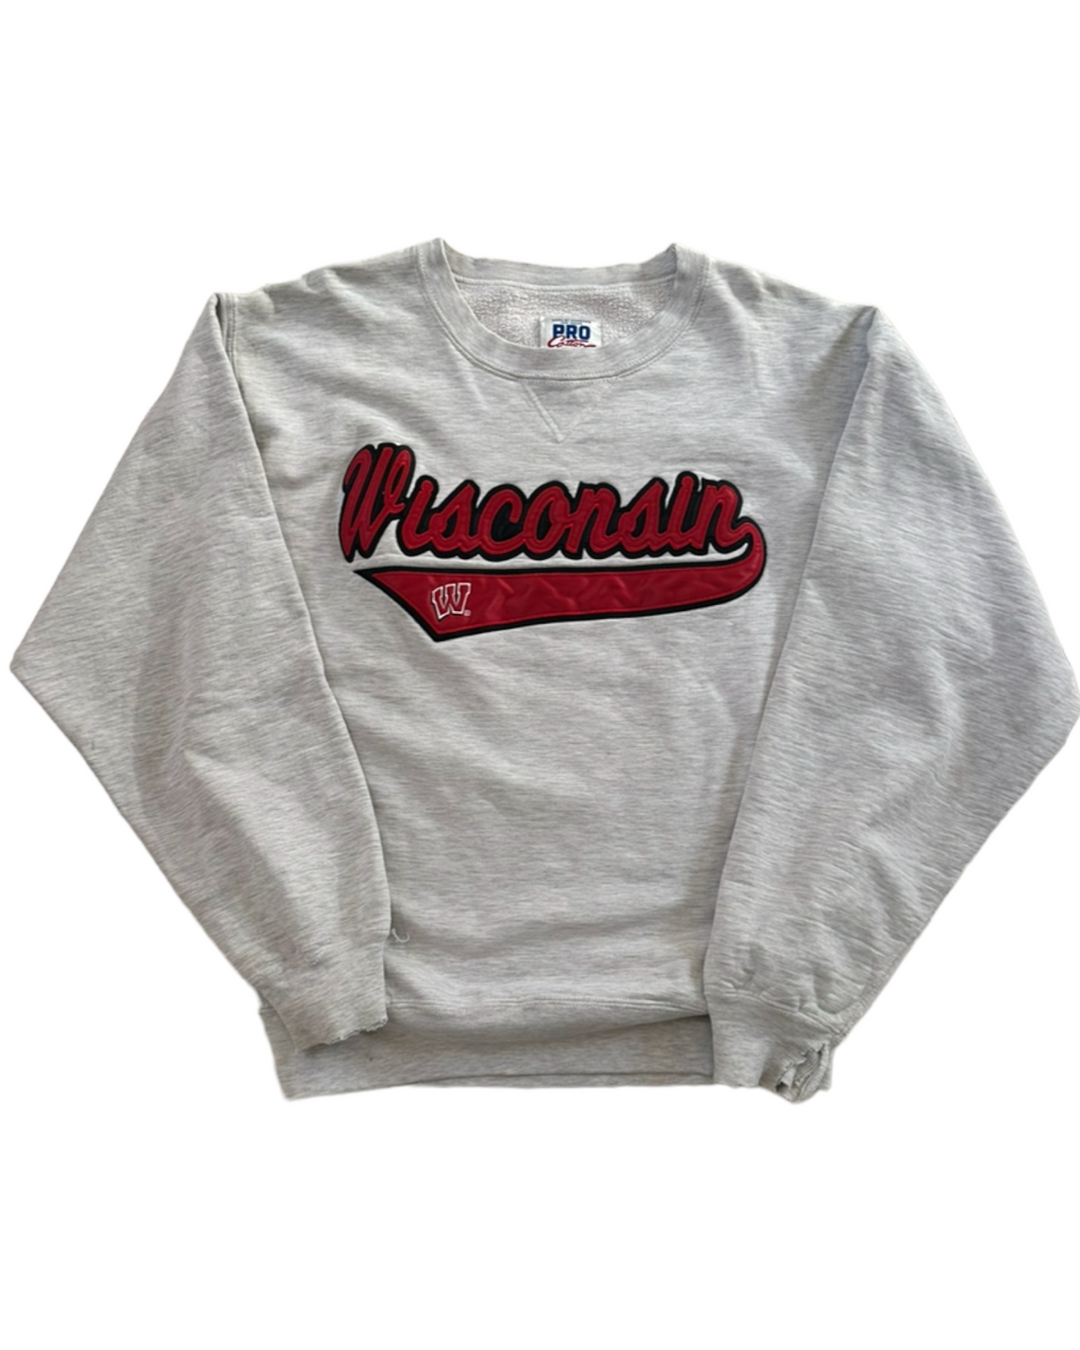 Wisconsin One Of A Kind Vintage Embroidered Sweatshirt